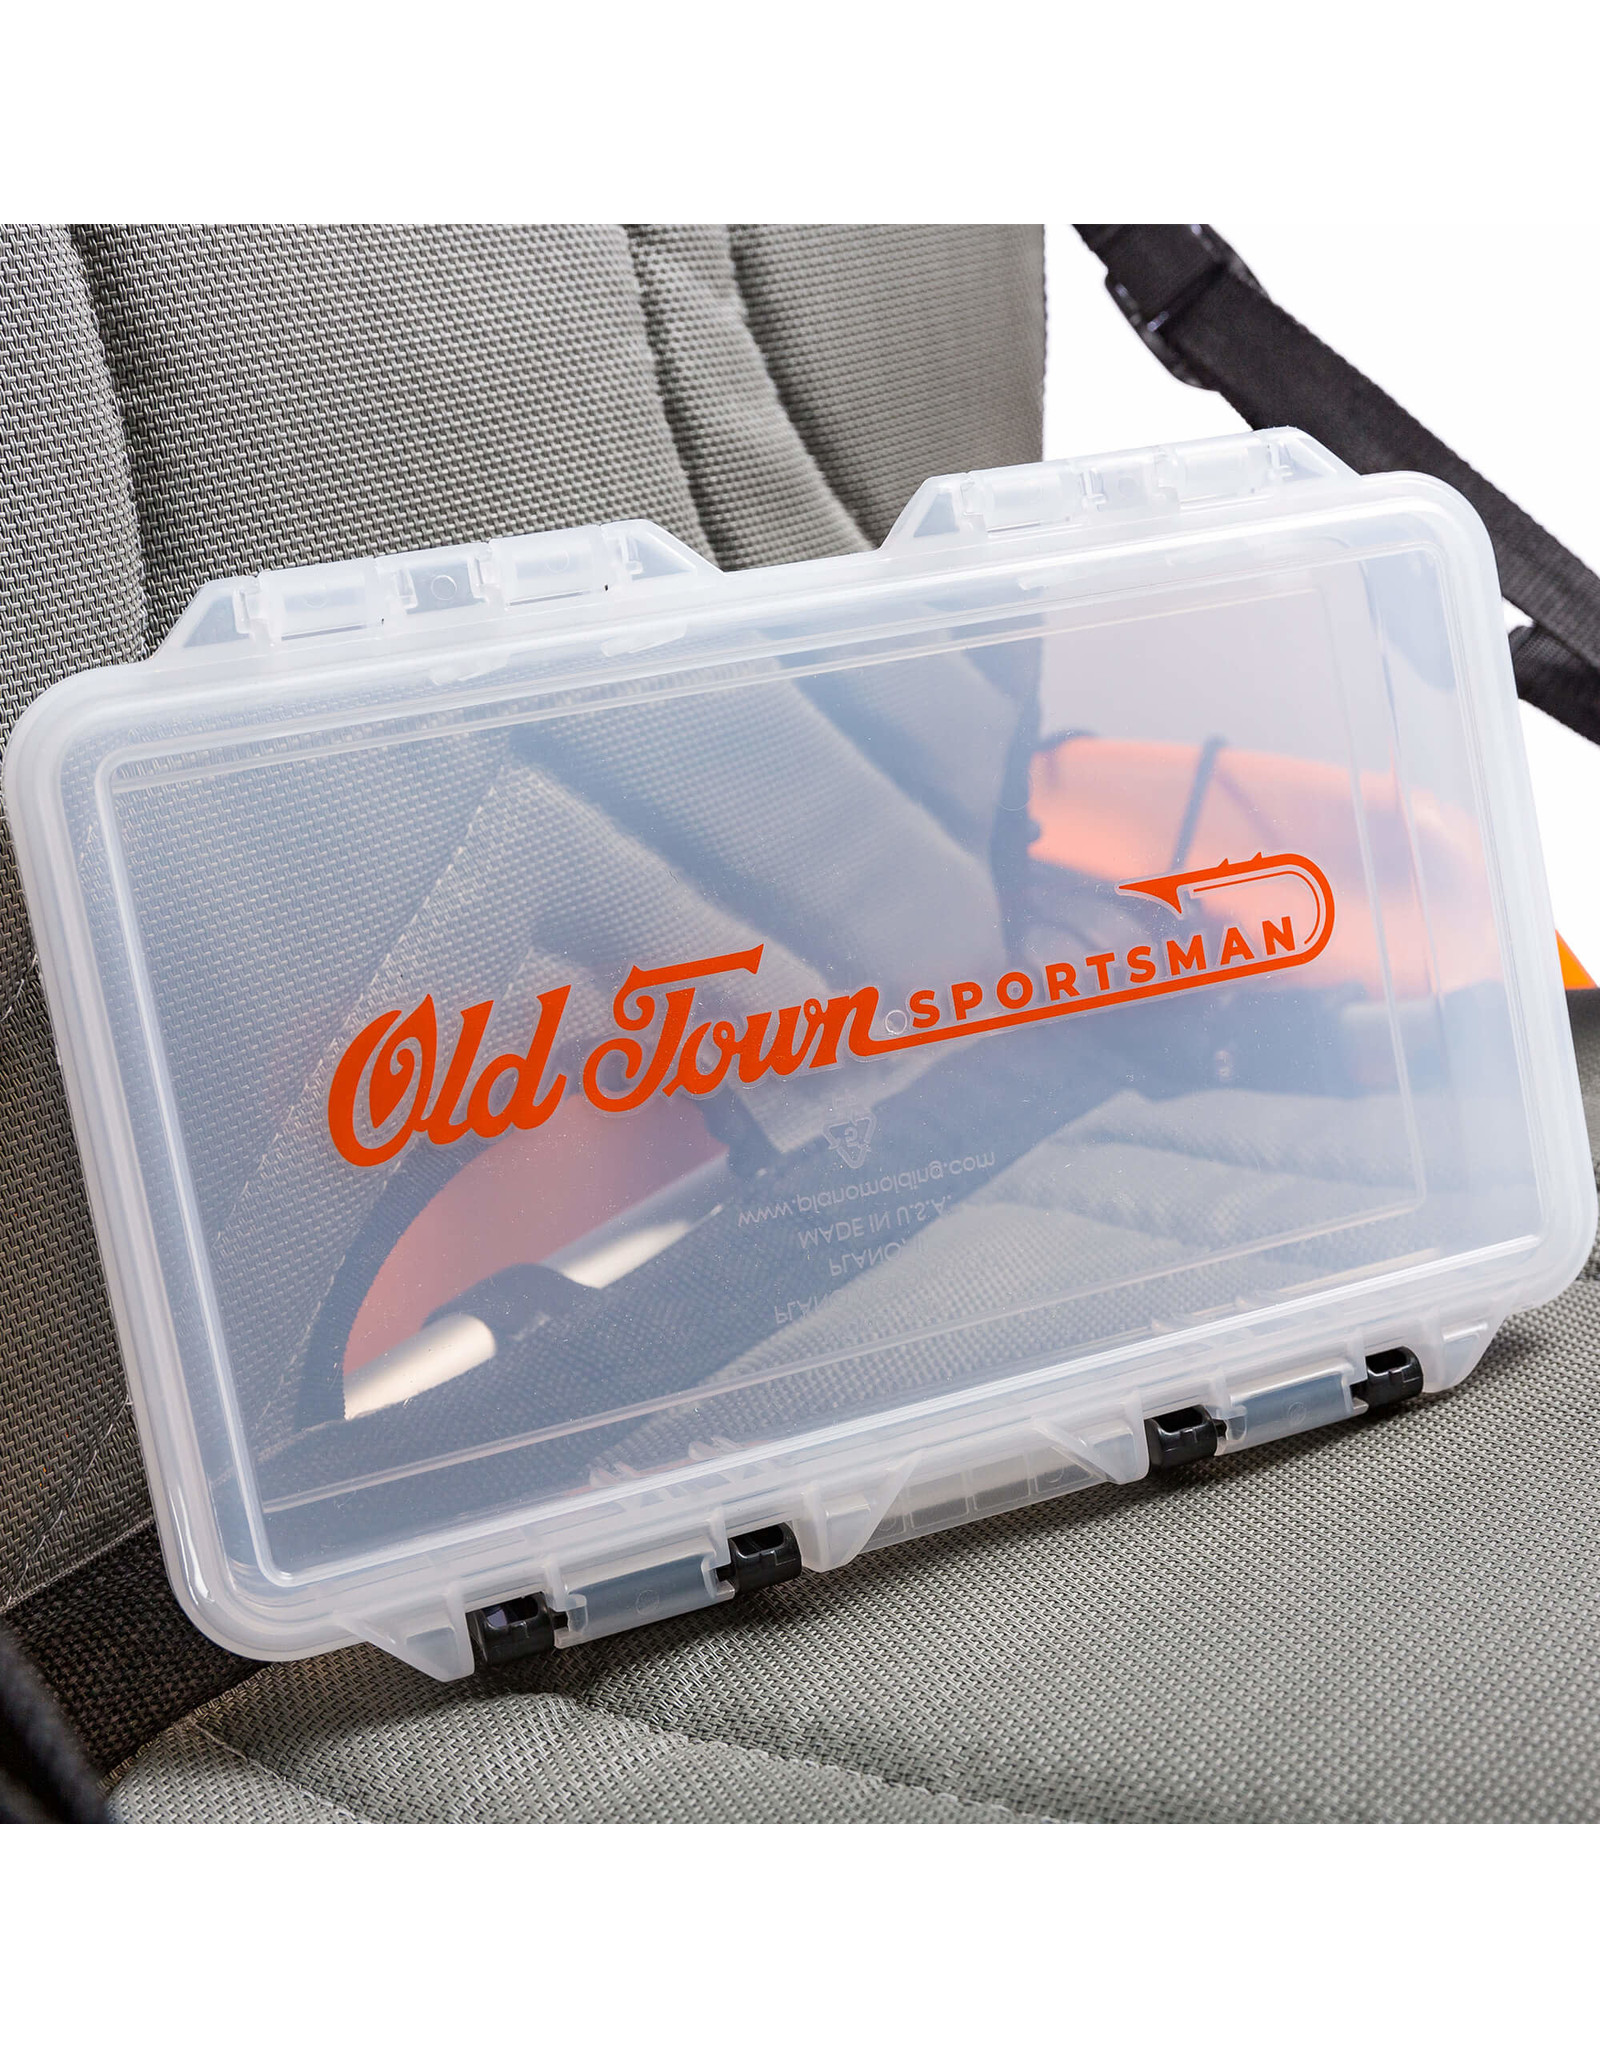 Old Town Old Town Acc. Sportsman Tackle Box